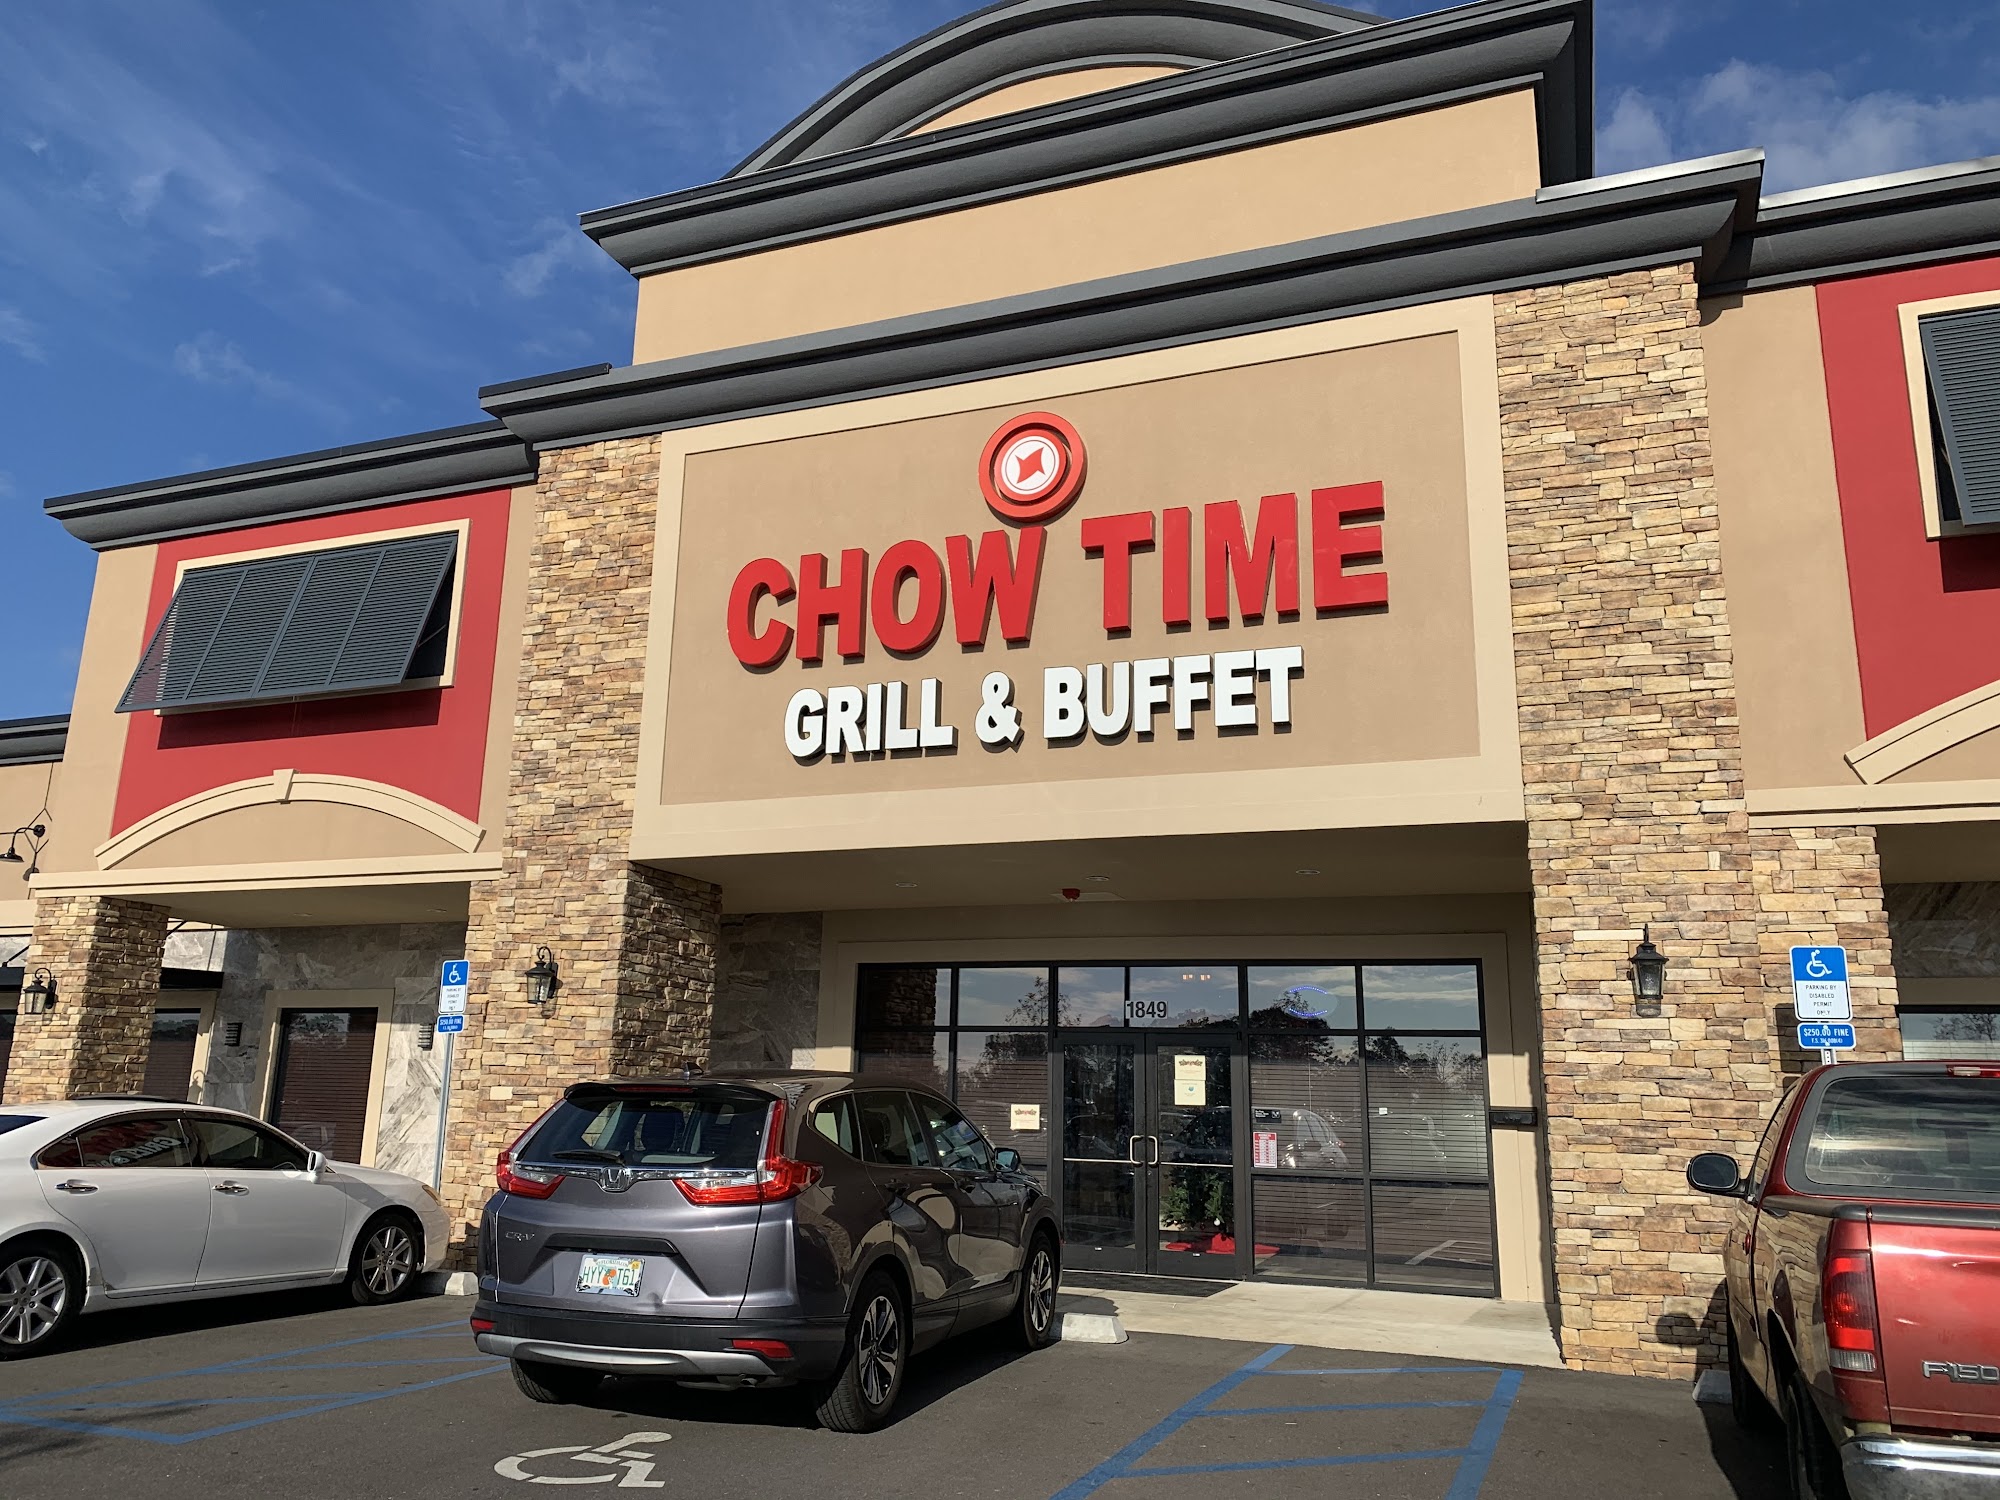 Chow Time Grill & Buffet